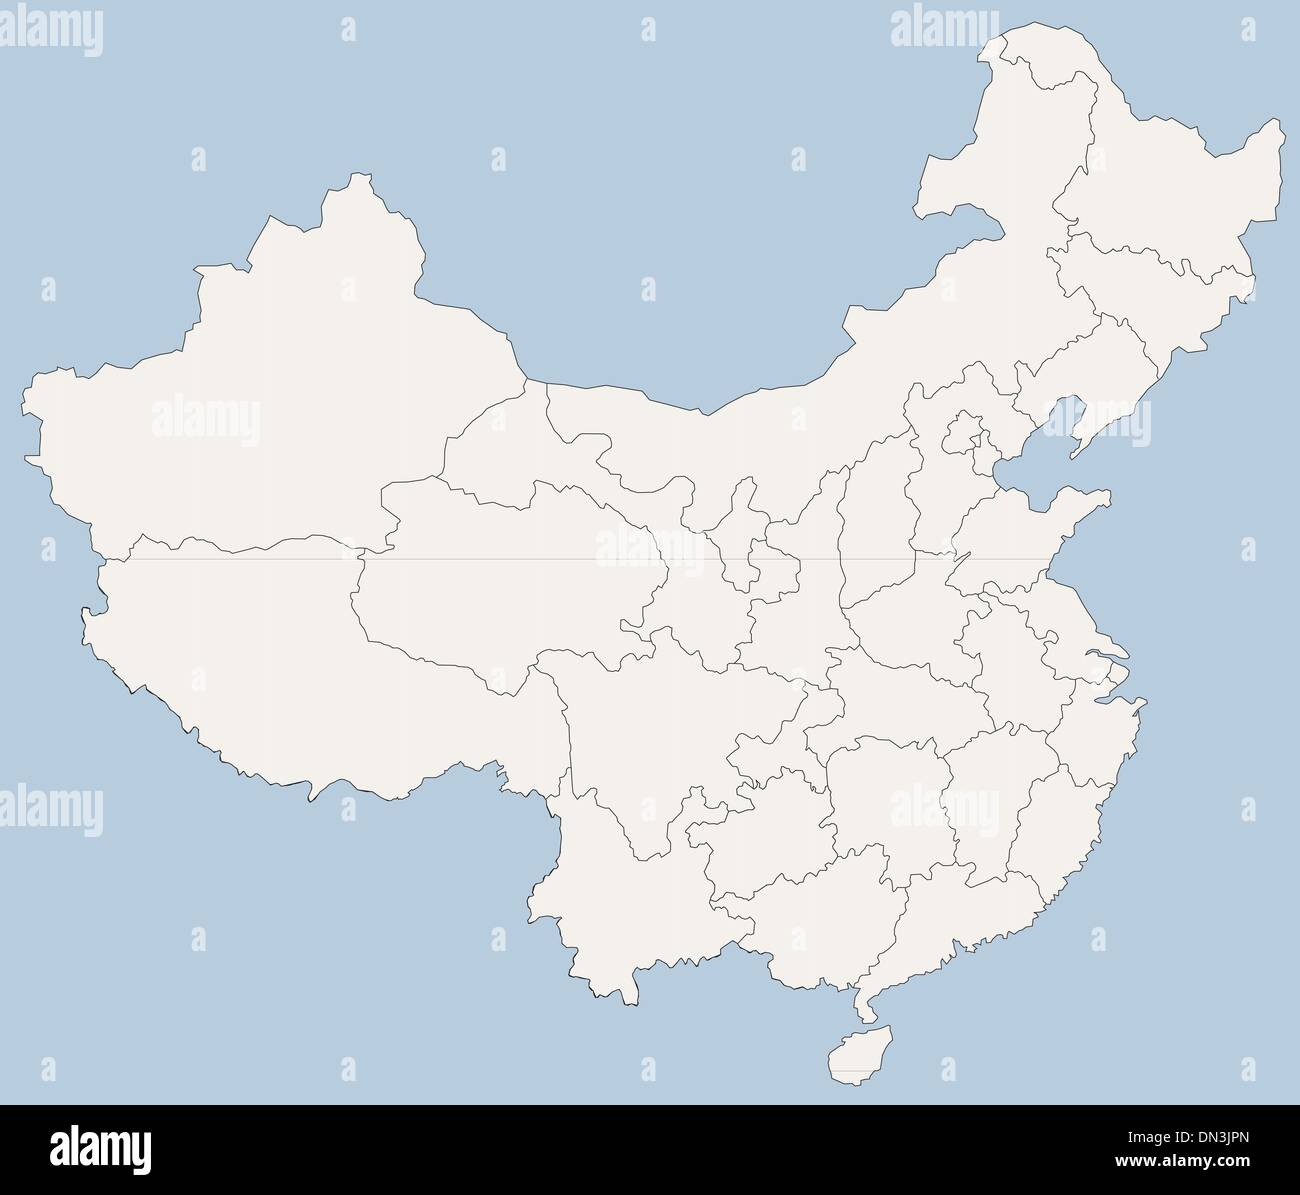 vector map of People's Republic of China (PRC) Stock Vector